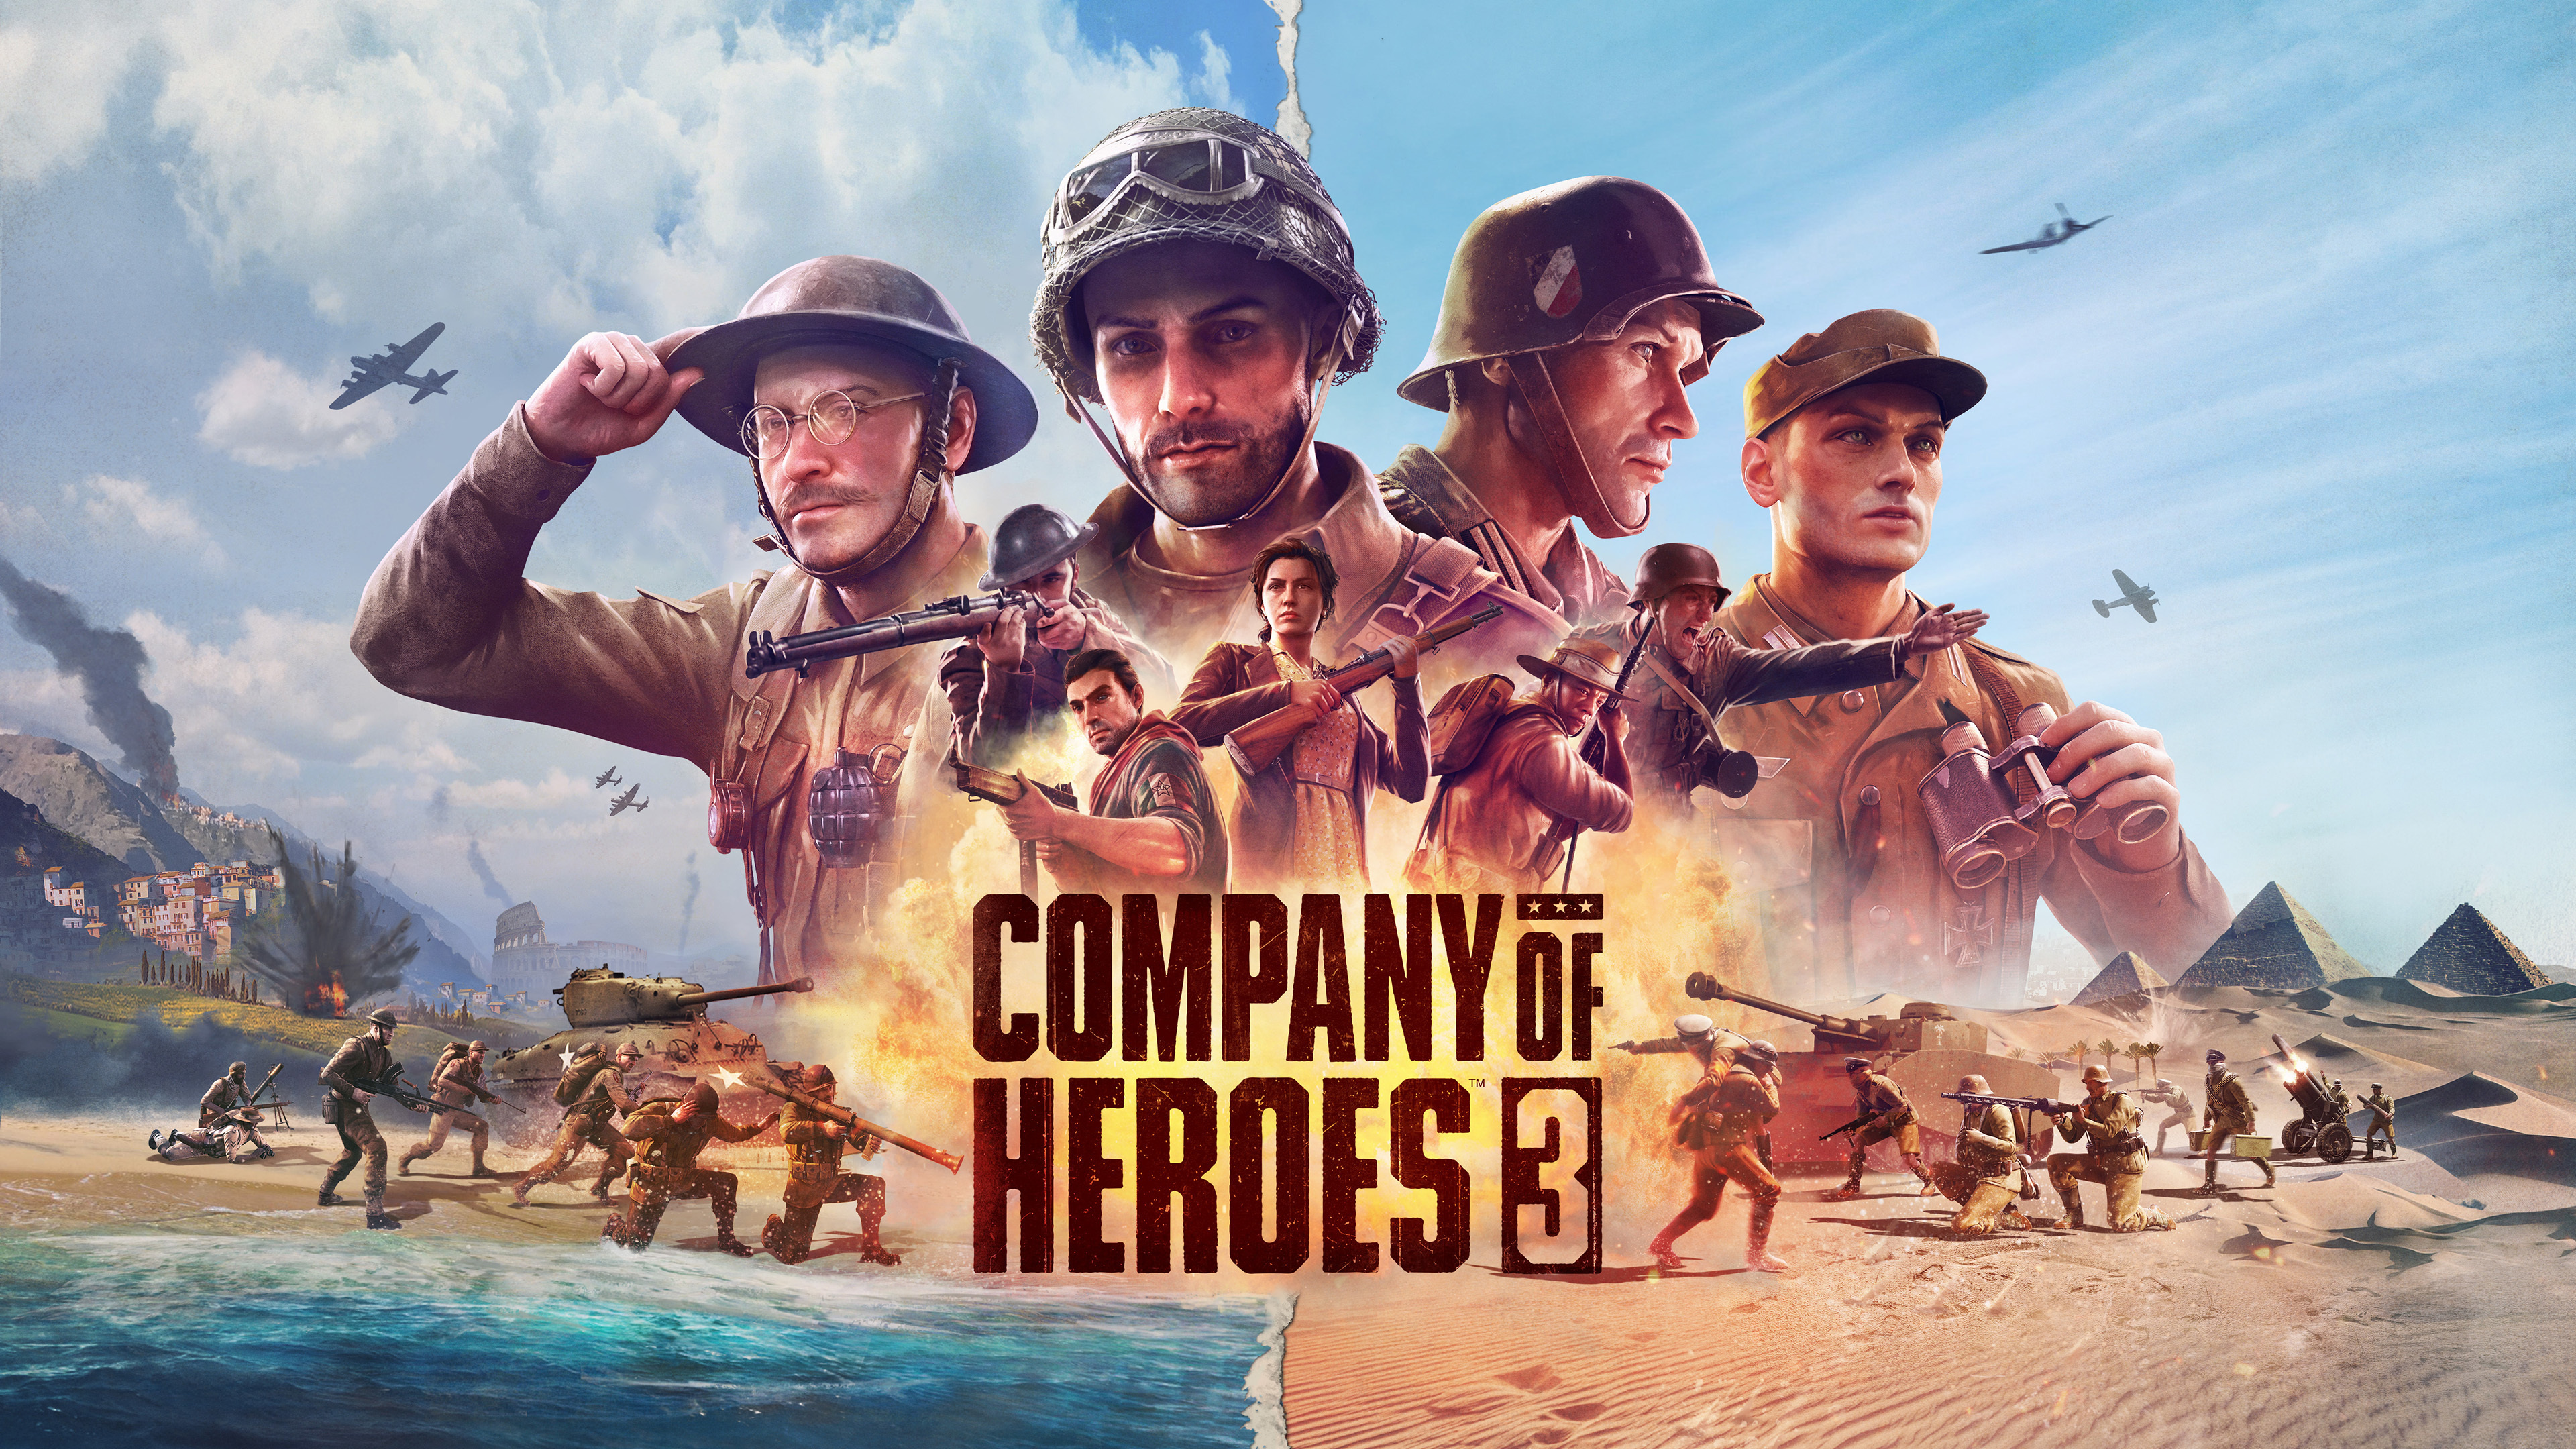 Company of Heroes 3: PC Games, Strategy game published by Sega for Microsoft Windows. 3840x2160 4K Wallpaper.